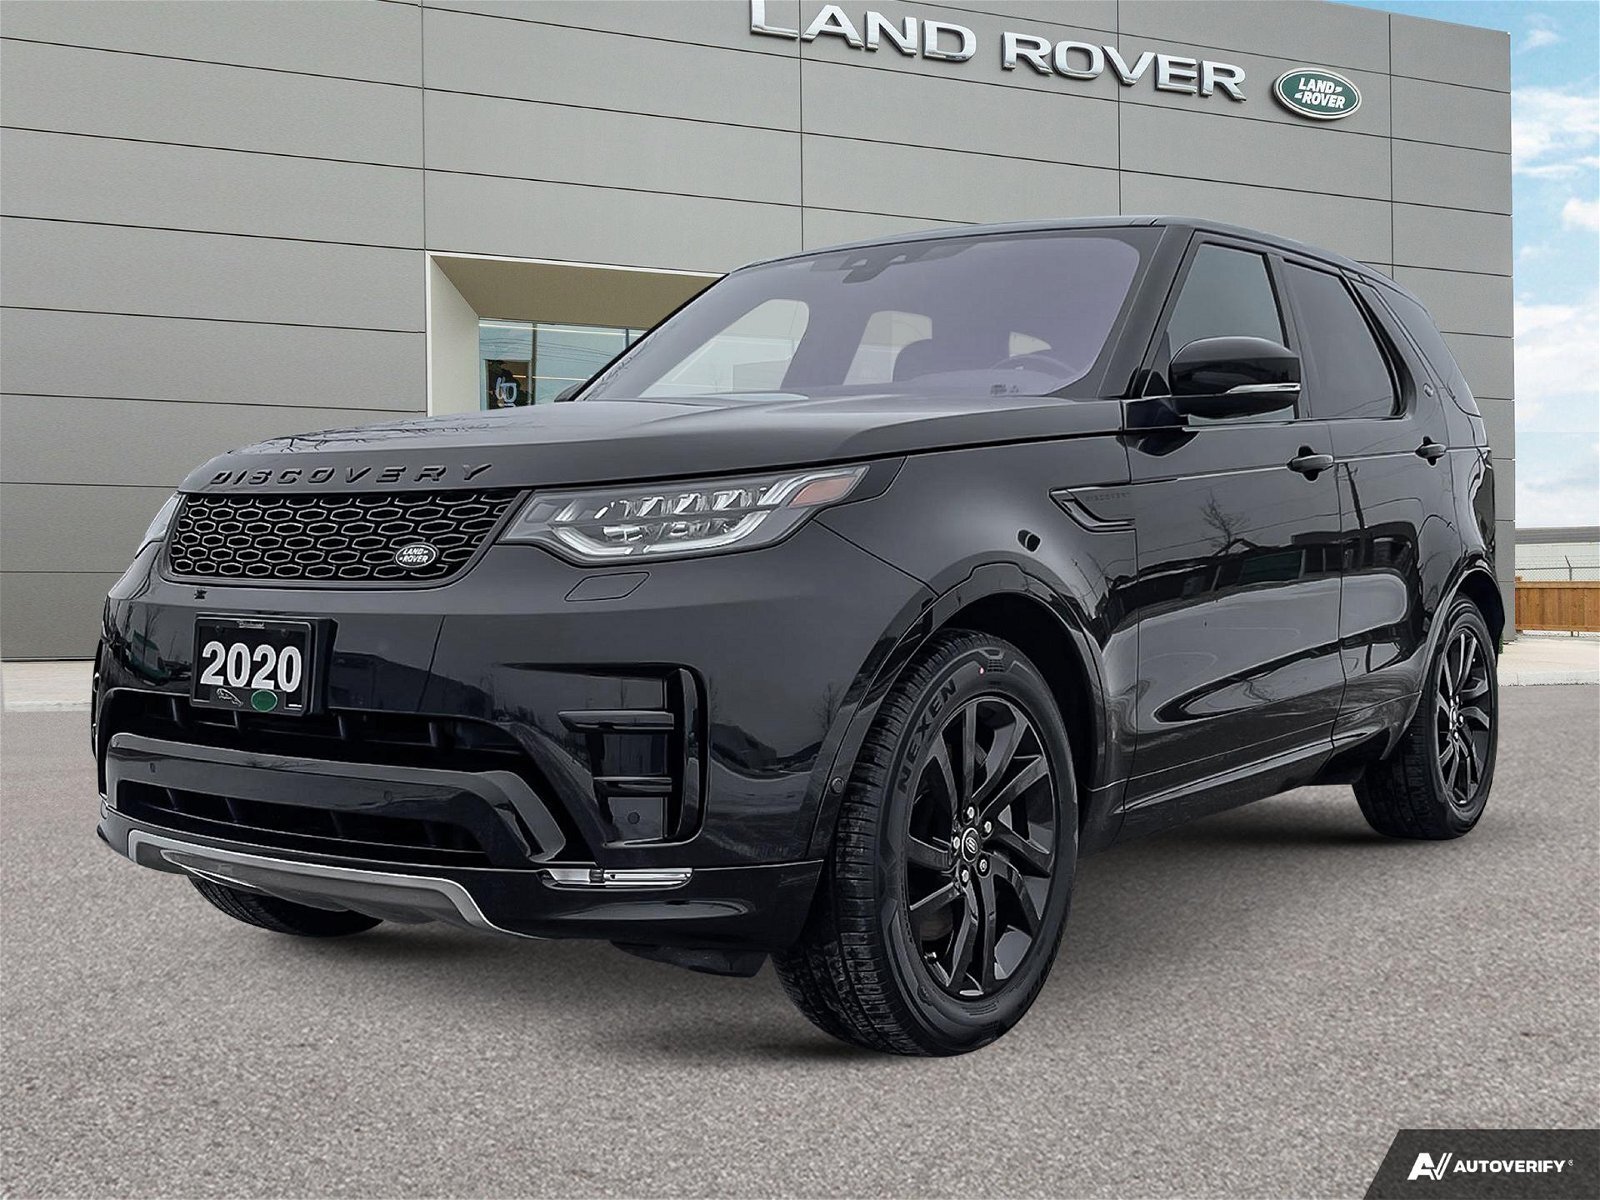 2020 Land Rover Discovery Landmark SOLD and DELIVERED